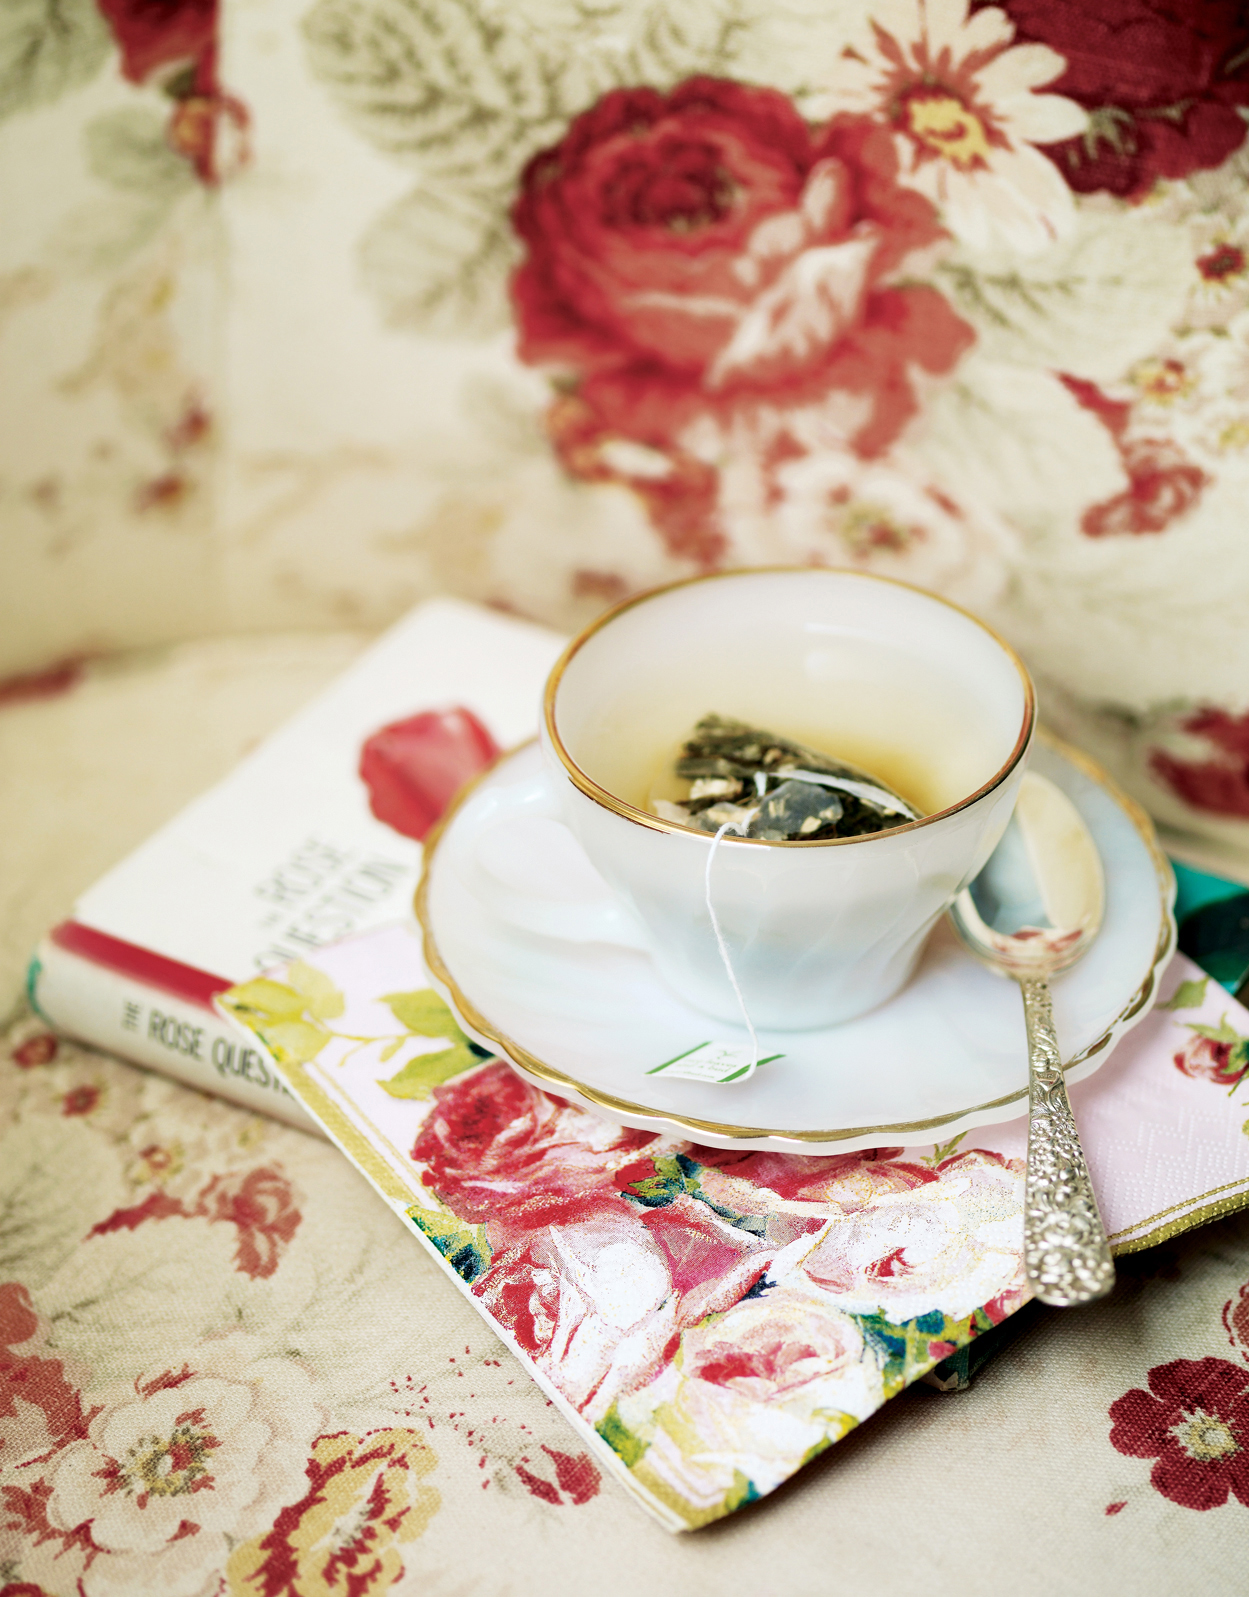 Home pleasures can be simple pleasures This vintage cup spoon and rose - photo 11